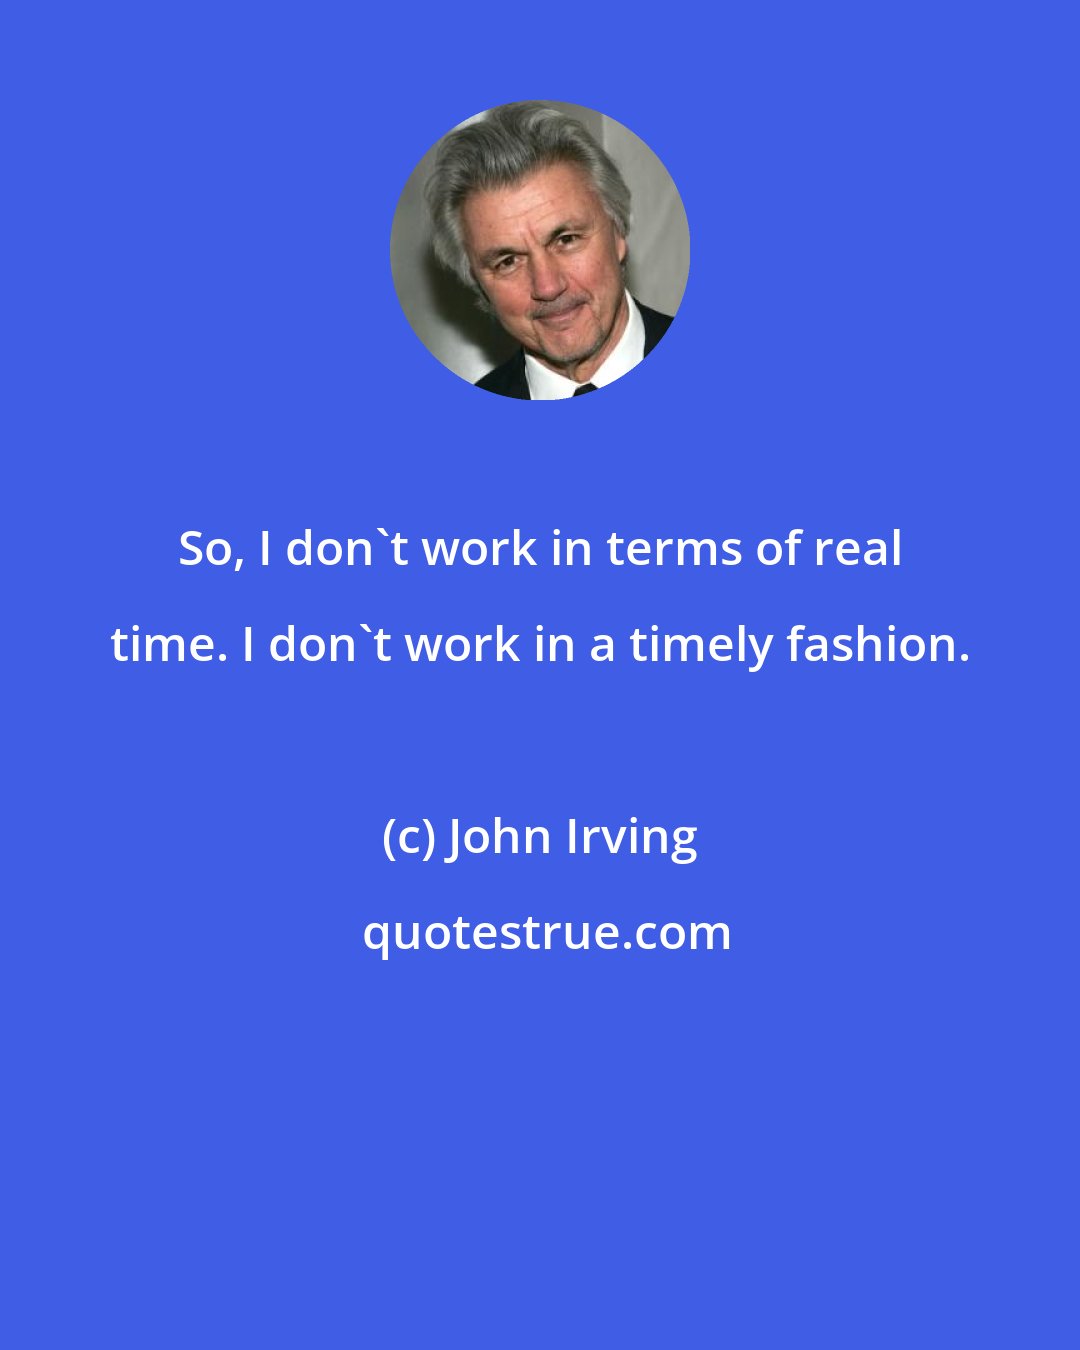 John Irving: So, I don't work in terms of real time. I don't work in a timely fashion.